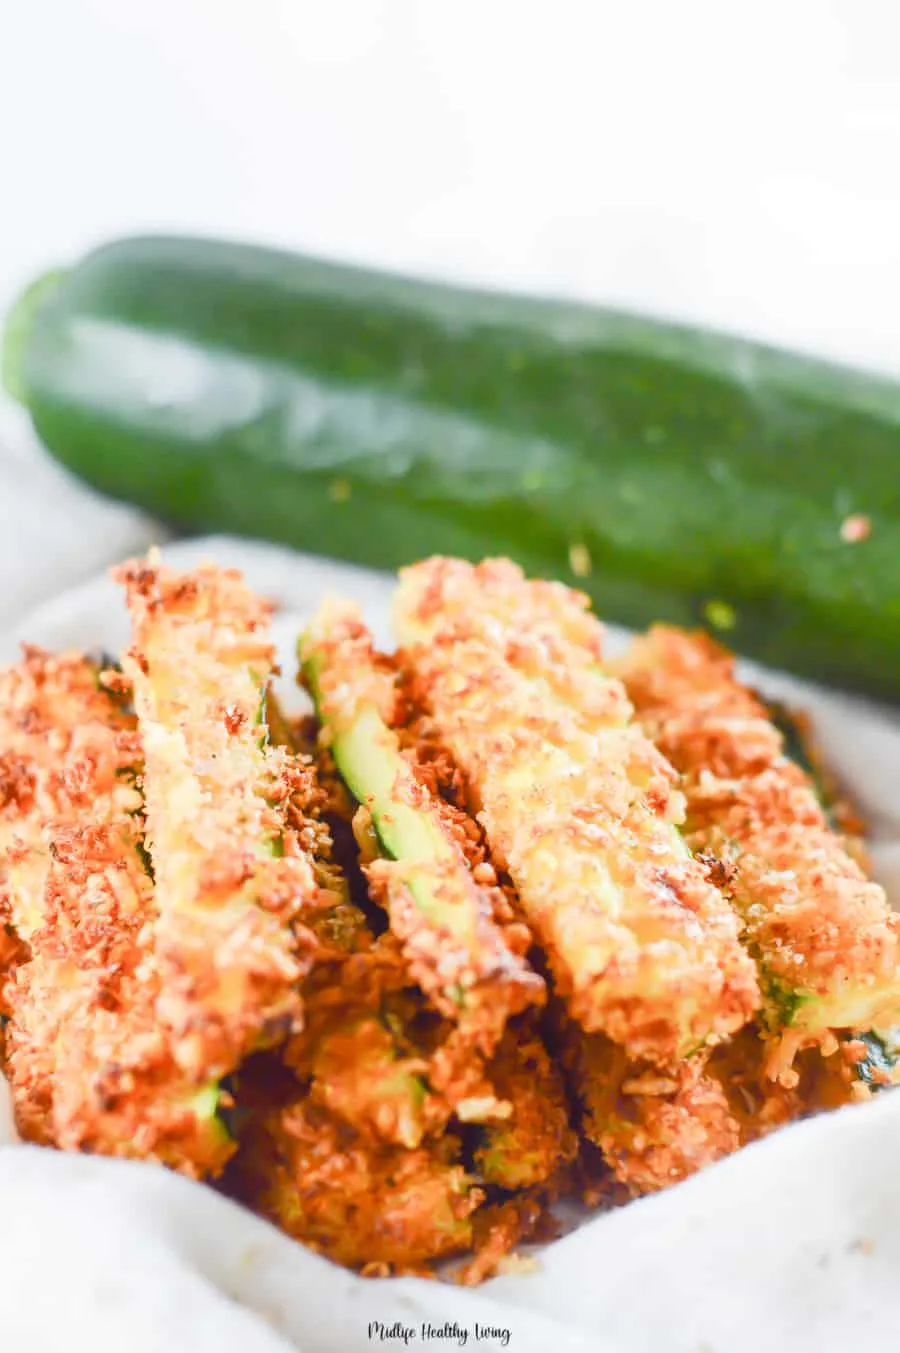 A final look at the finished zucchini fries recipe! 